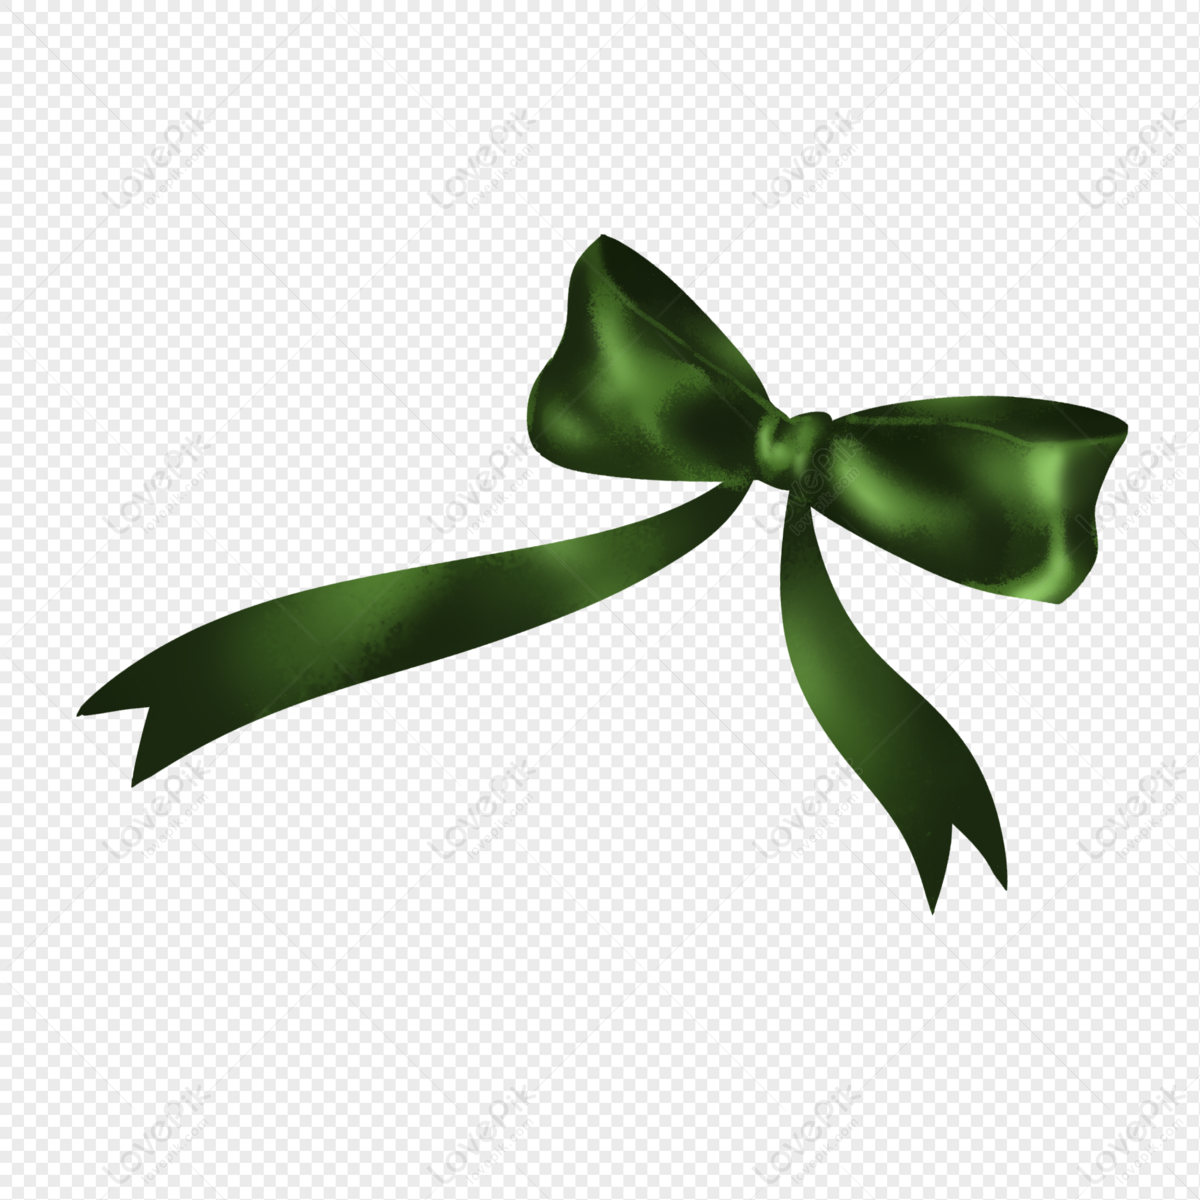 Light Green Small Fresh Ribbon, Light Vector, Ribbon Vector, Ribbon  Transparent PNG Hd Transparent Image And Clipart Image For Free Download -  Lovepik